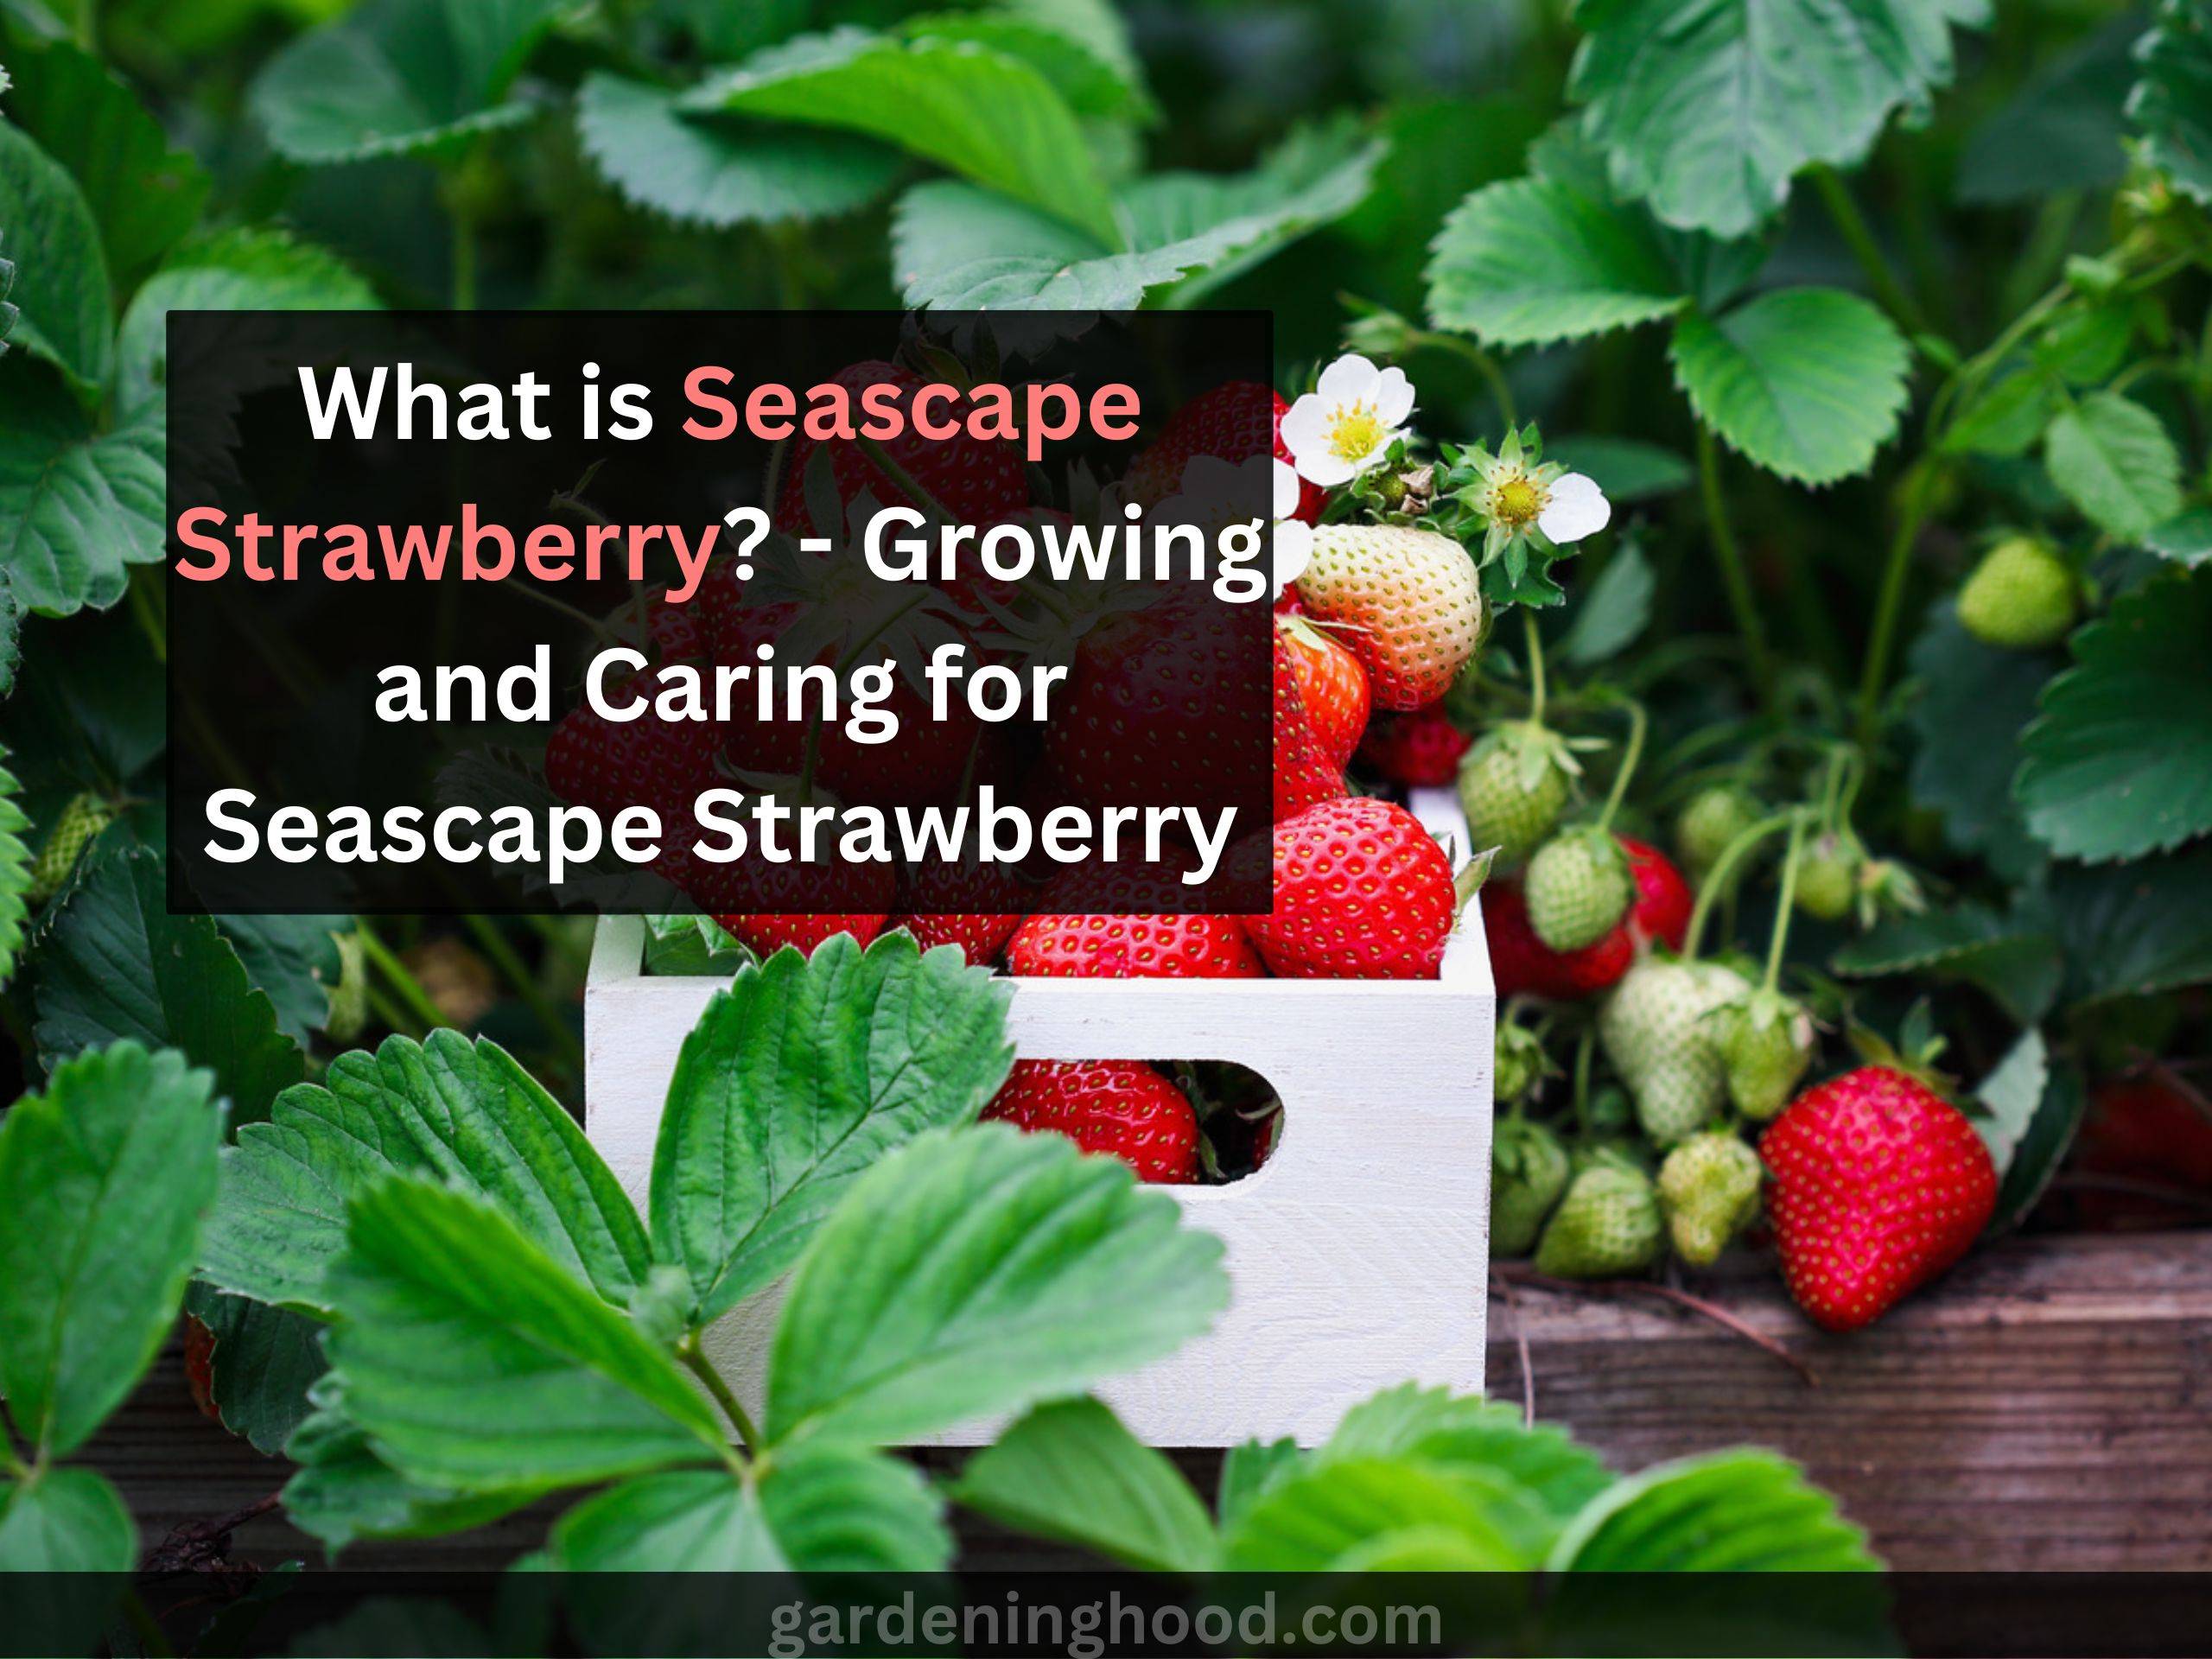 What is Seascape Strawberry? - Growing and Caring for Seascape Strawberry